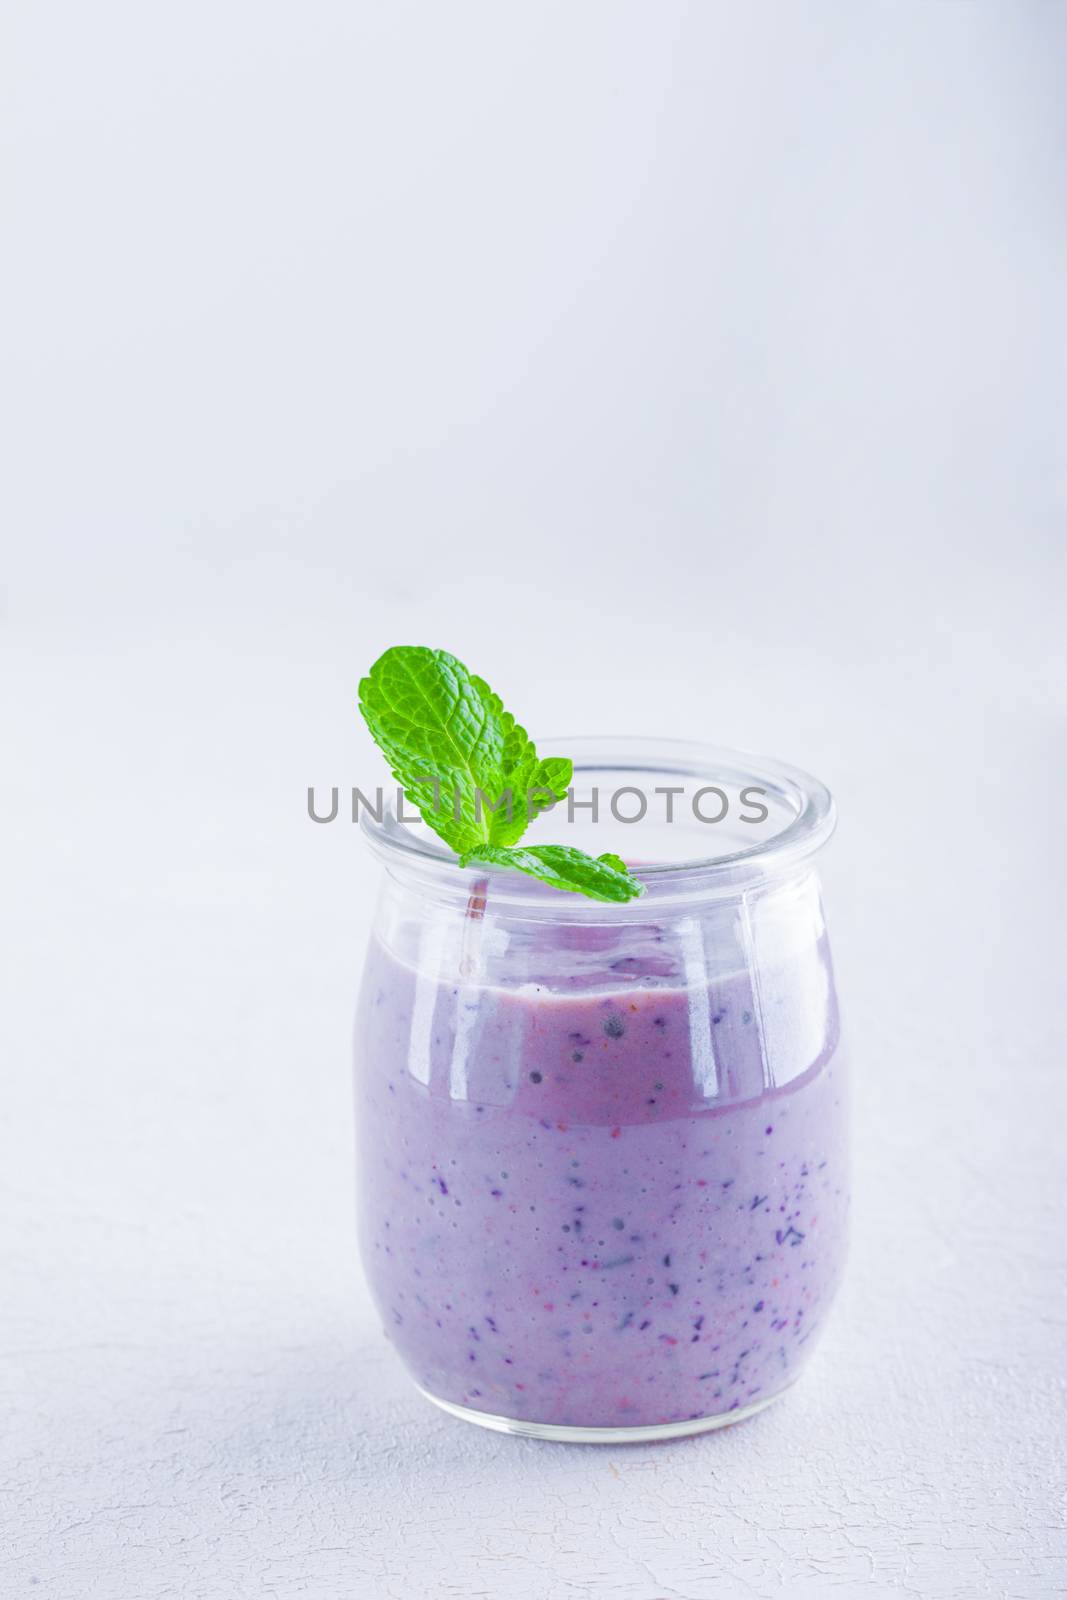 Delicious blueberry yoghurt smoothie by supercat67